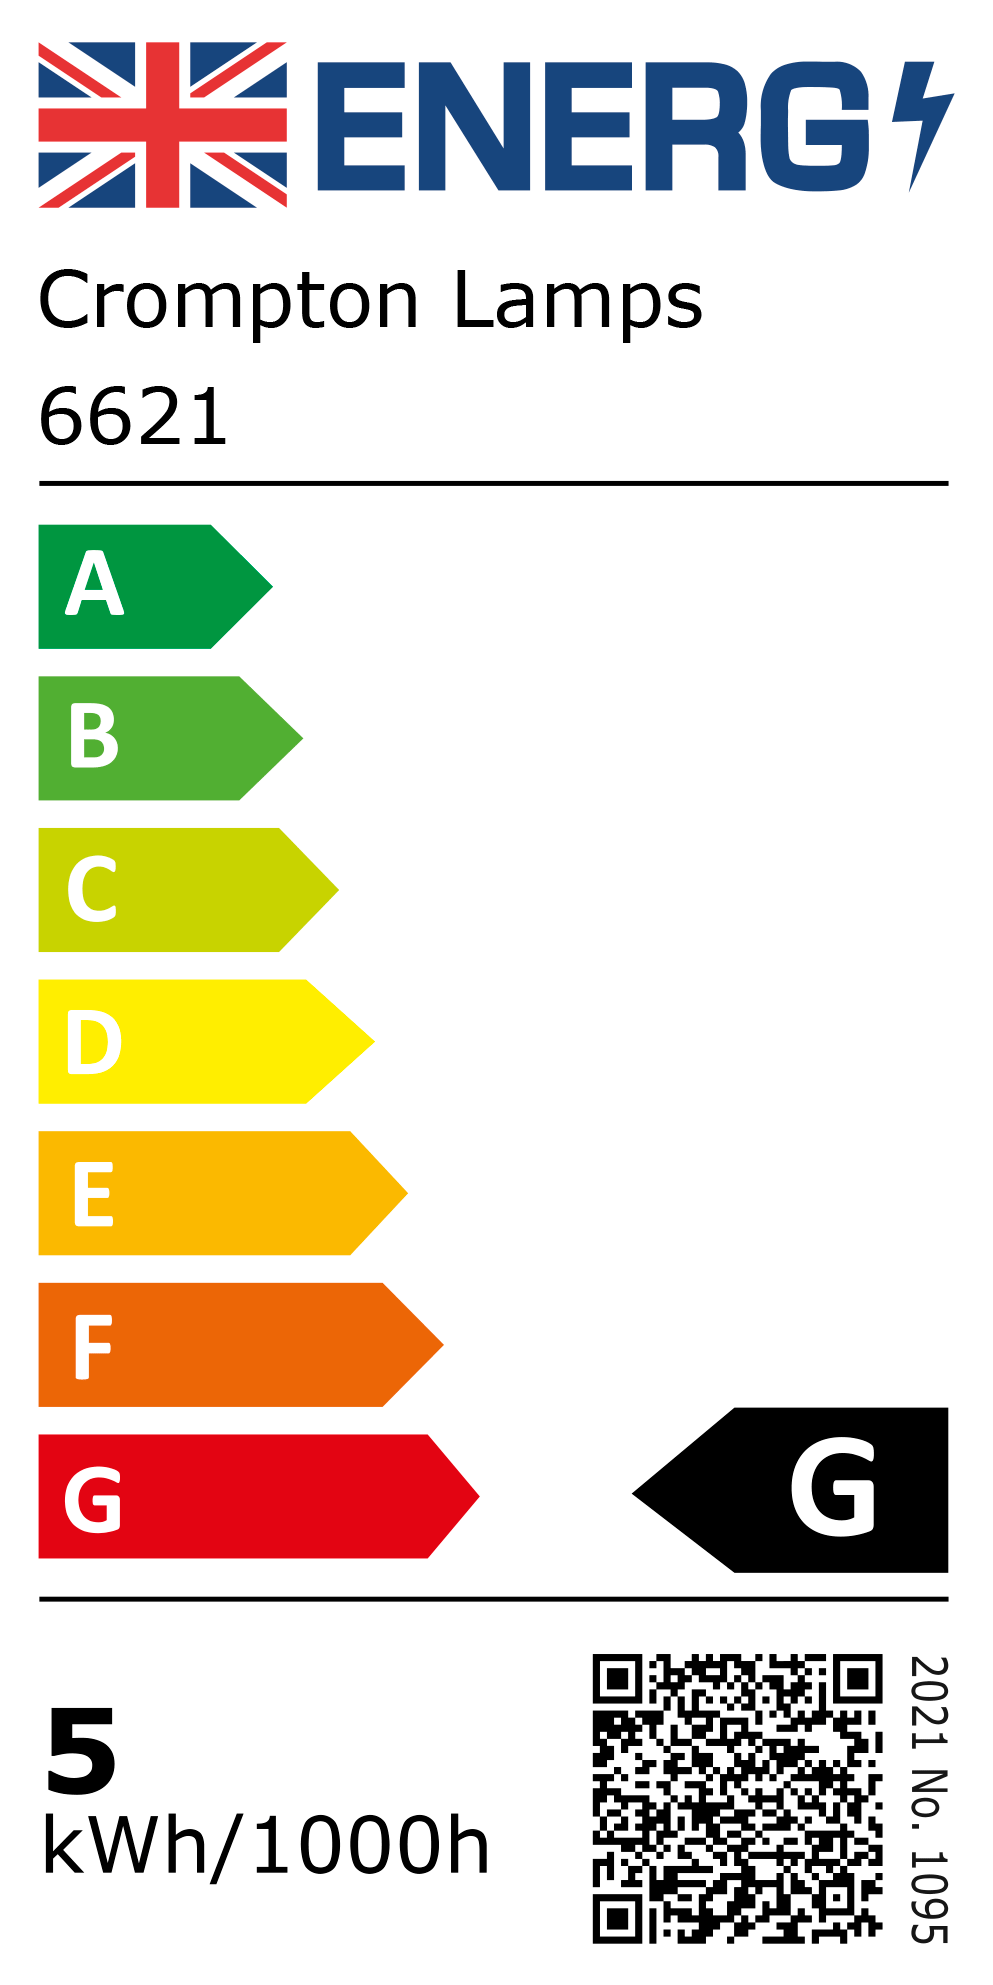 New 2021 Energy Rating Label: Stock Code 6621